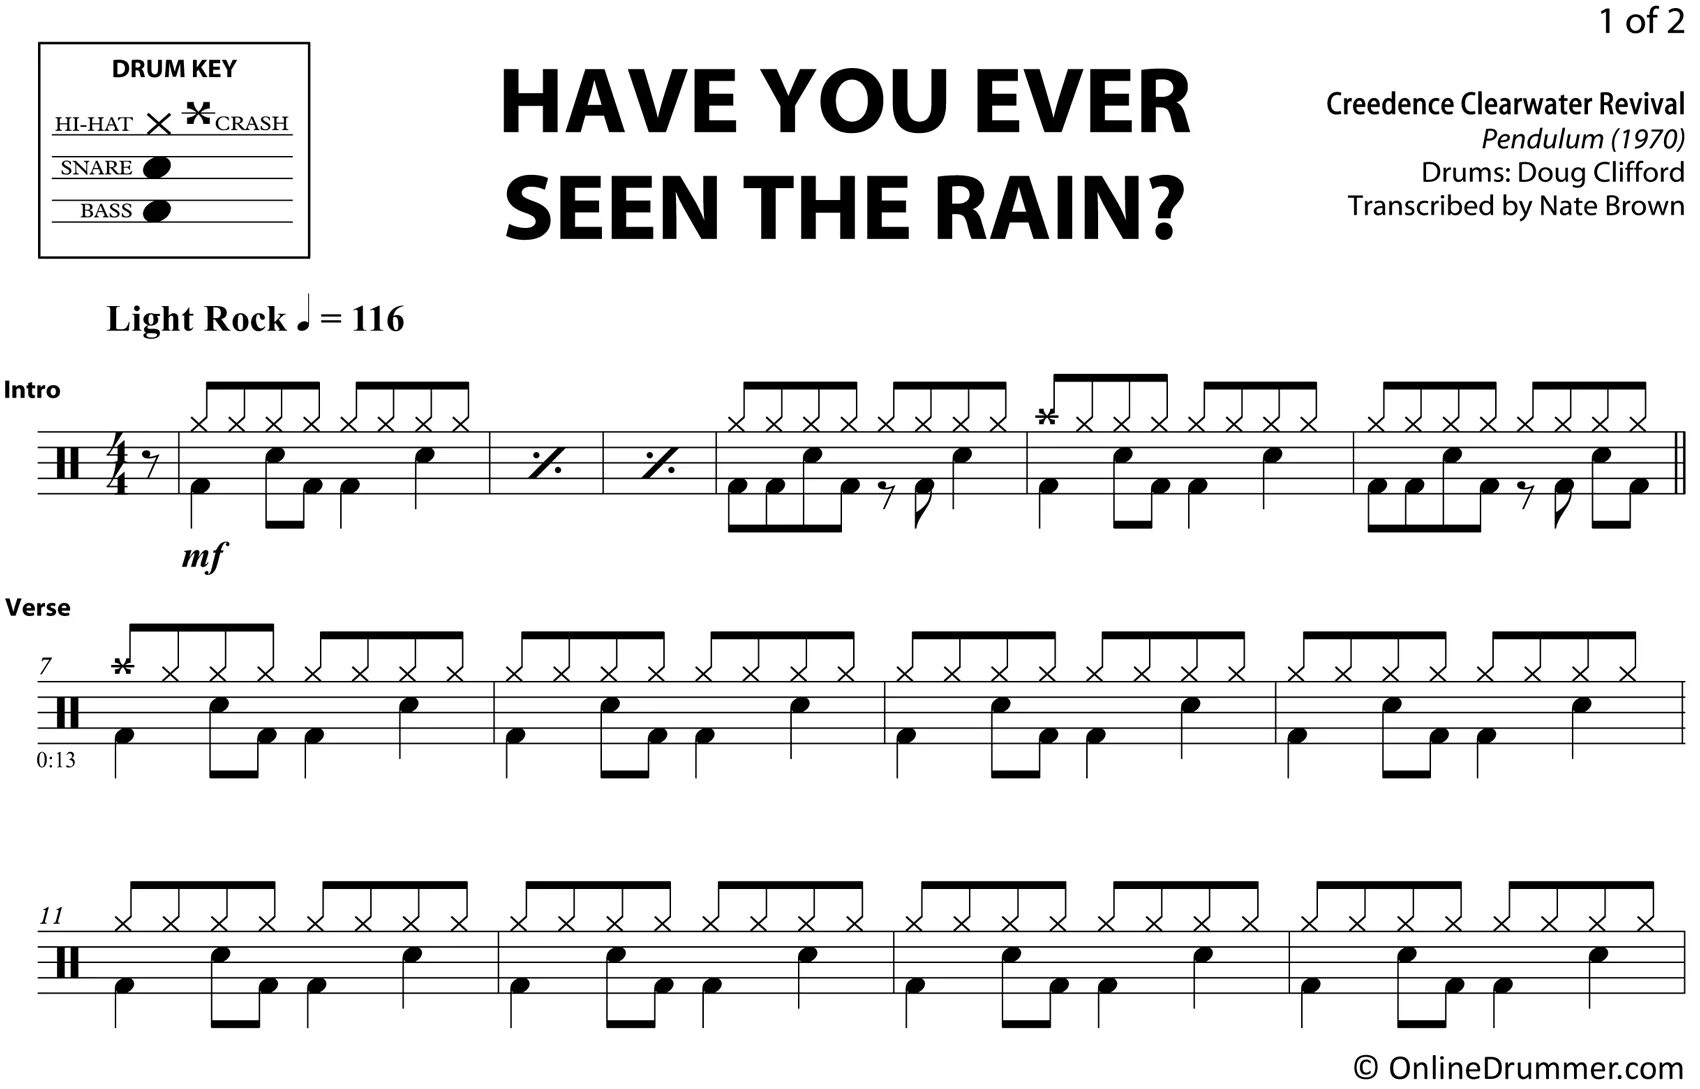 Creedence clearwater rain. Have you ever seen the Rain? От Creedence Clearwater Revival. Creedence Clearwater Revival - have you ever seen the Rain (1970). Have you ever seen the Rain Криденс. Have you ever seen the Rain Ноты.